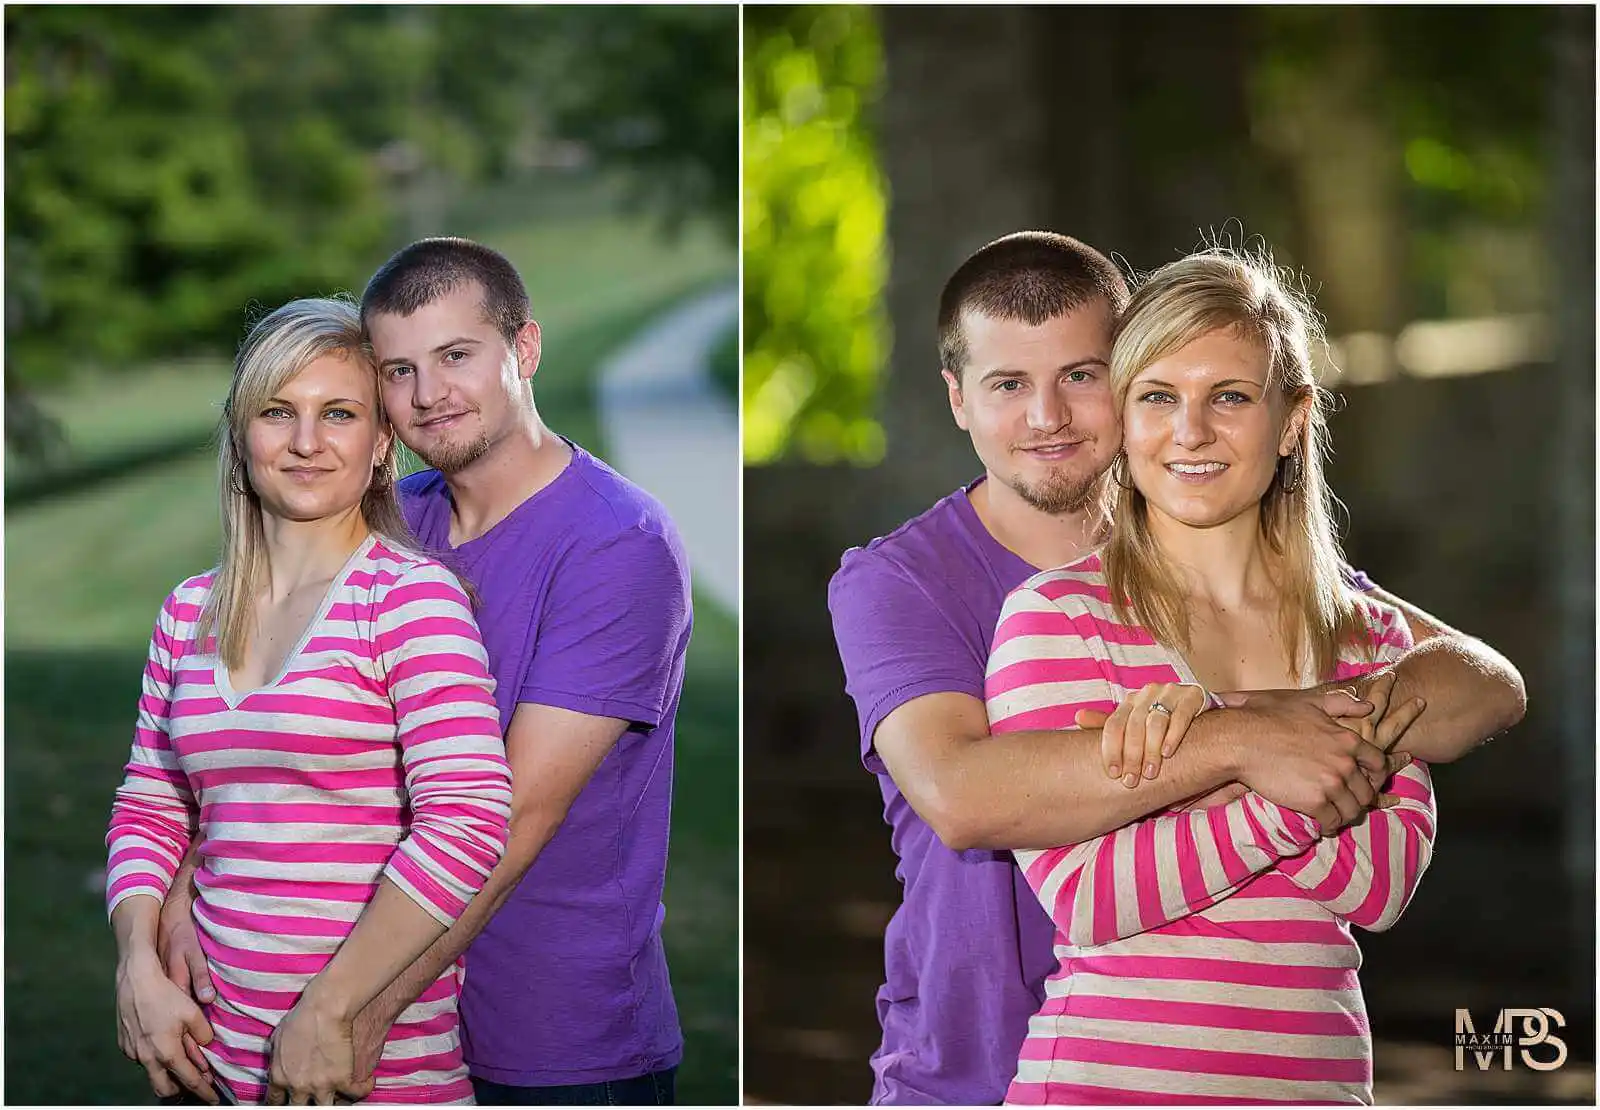 Loving couple in a casual outdoor portrait session.